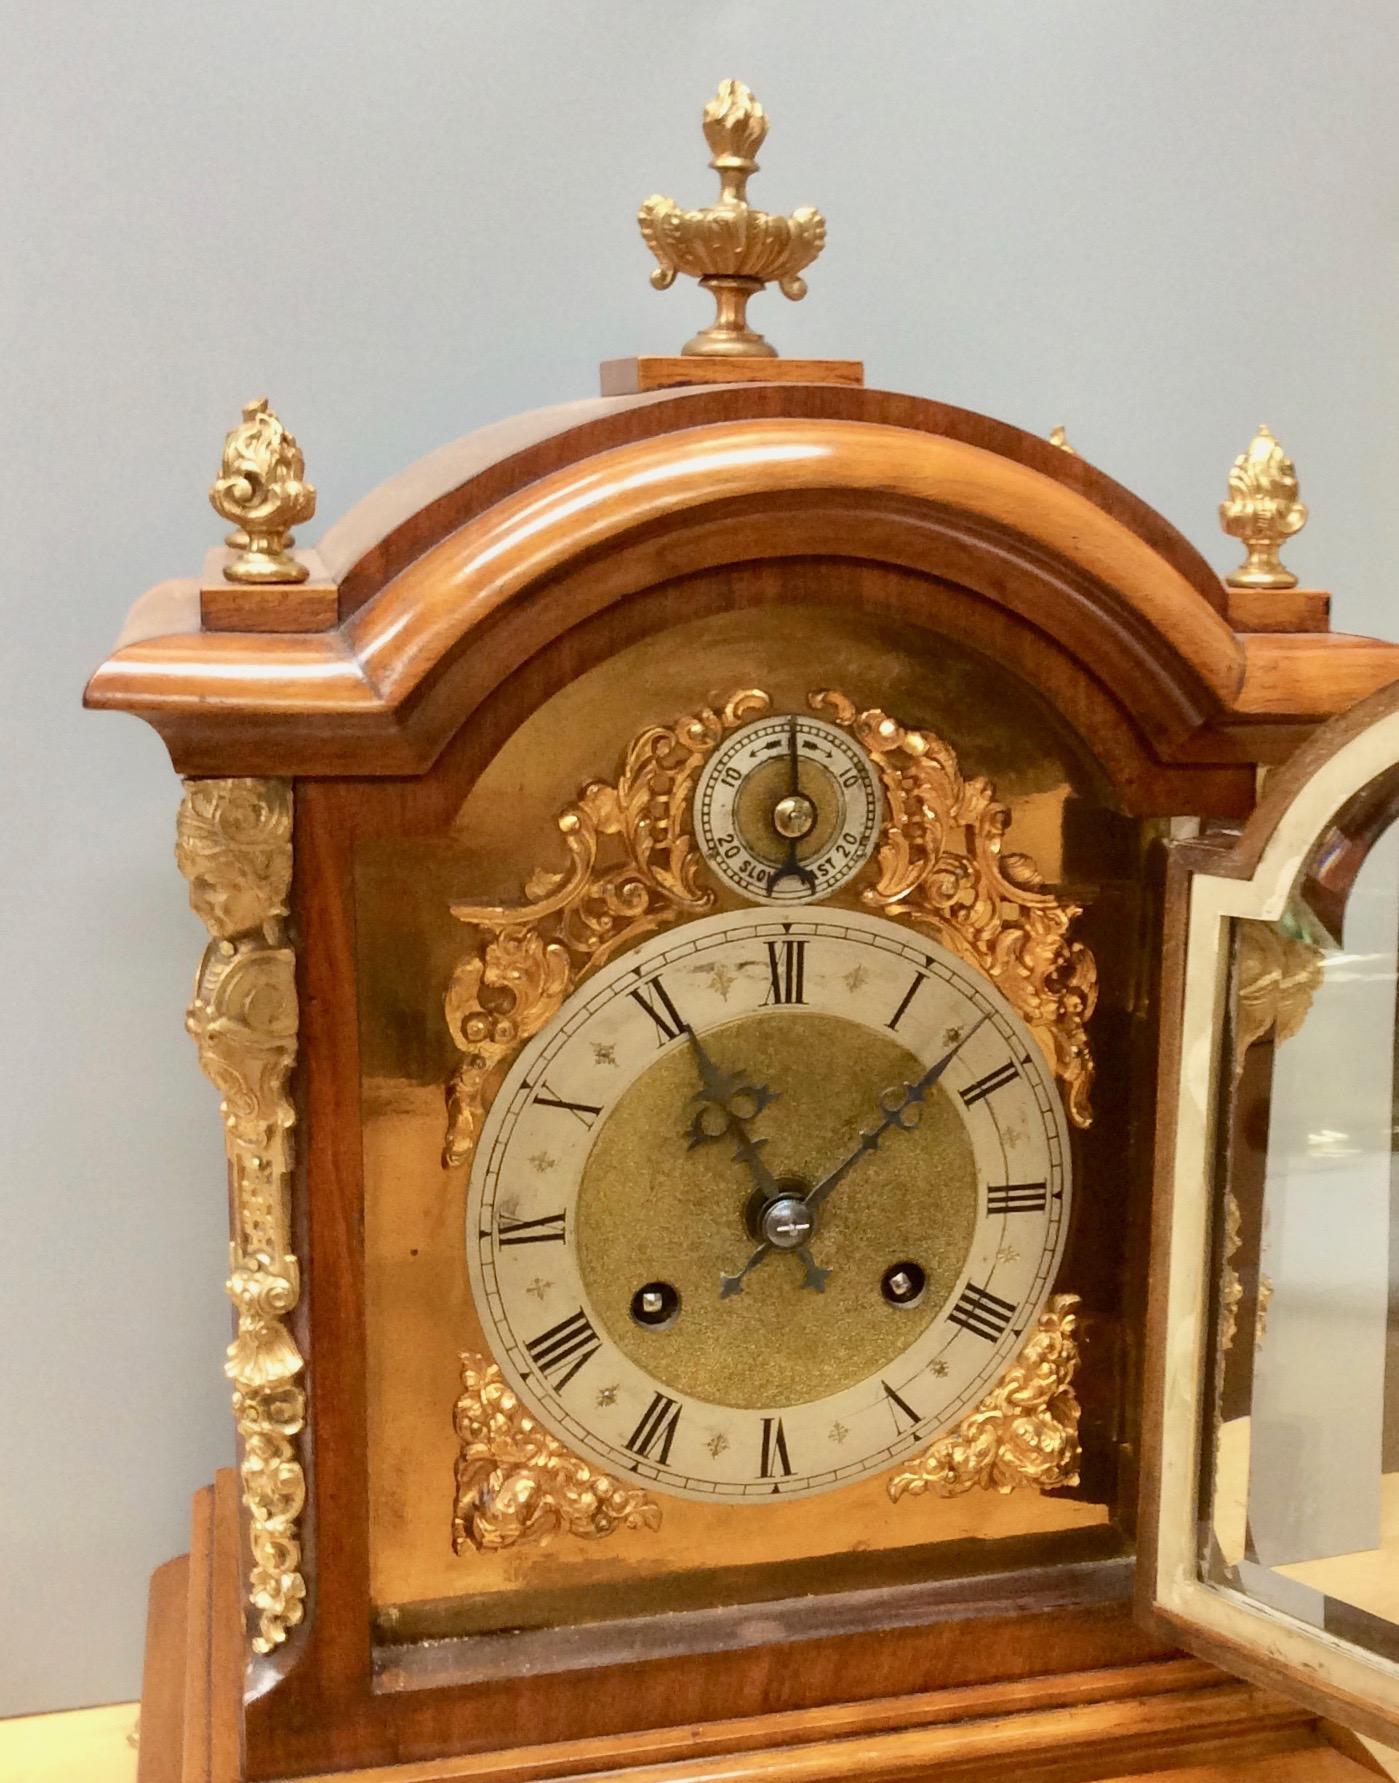 Late Victorian walnut break arch mantel clock standing on a raised plinth and resting on four outswept gilded paw feet and surmounted by four flame finials and a central finial.

Heavy beveled glass door opening to a brass dial with finely matted